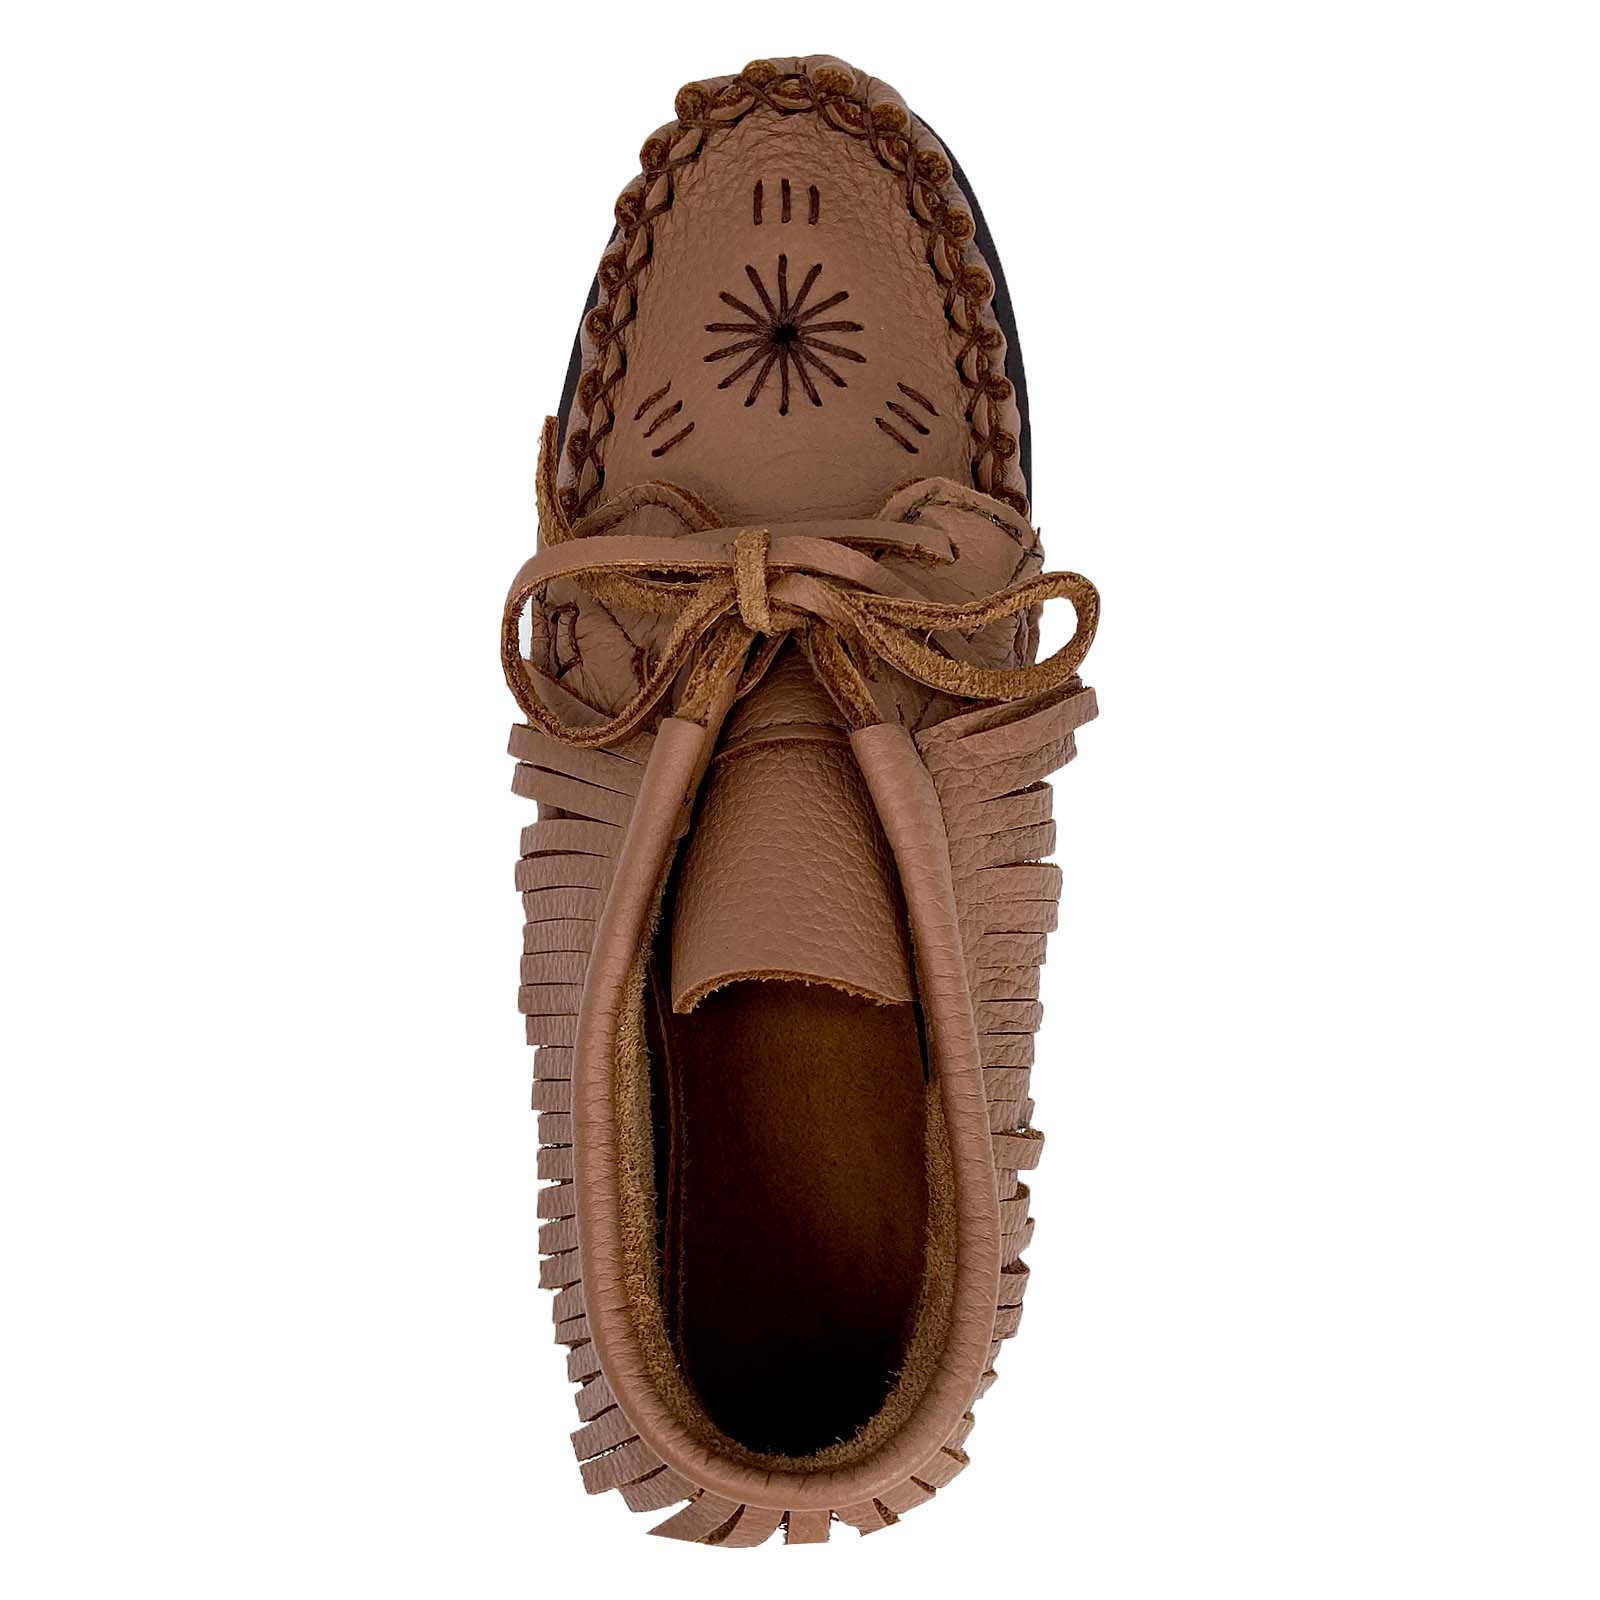 Women's Earthing Moccasin Shoes with Copper Rivet (Final Clearance)